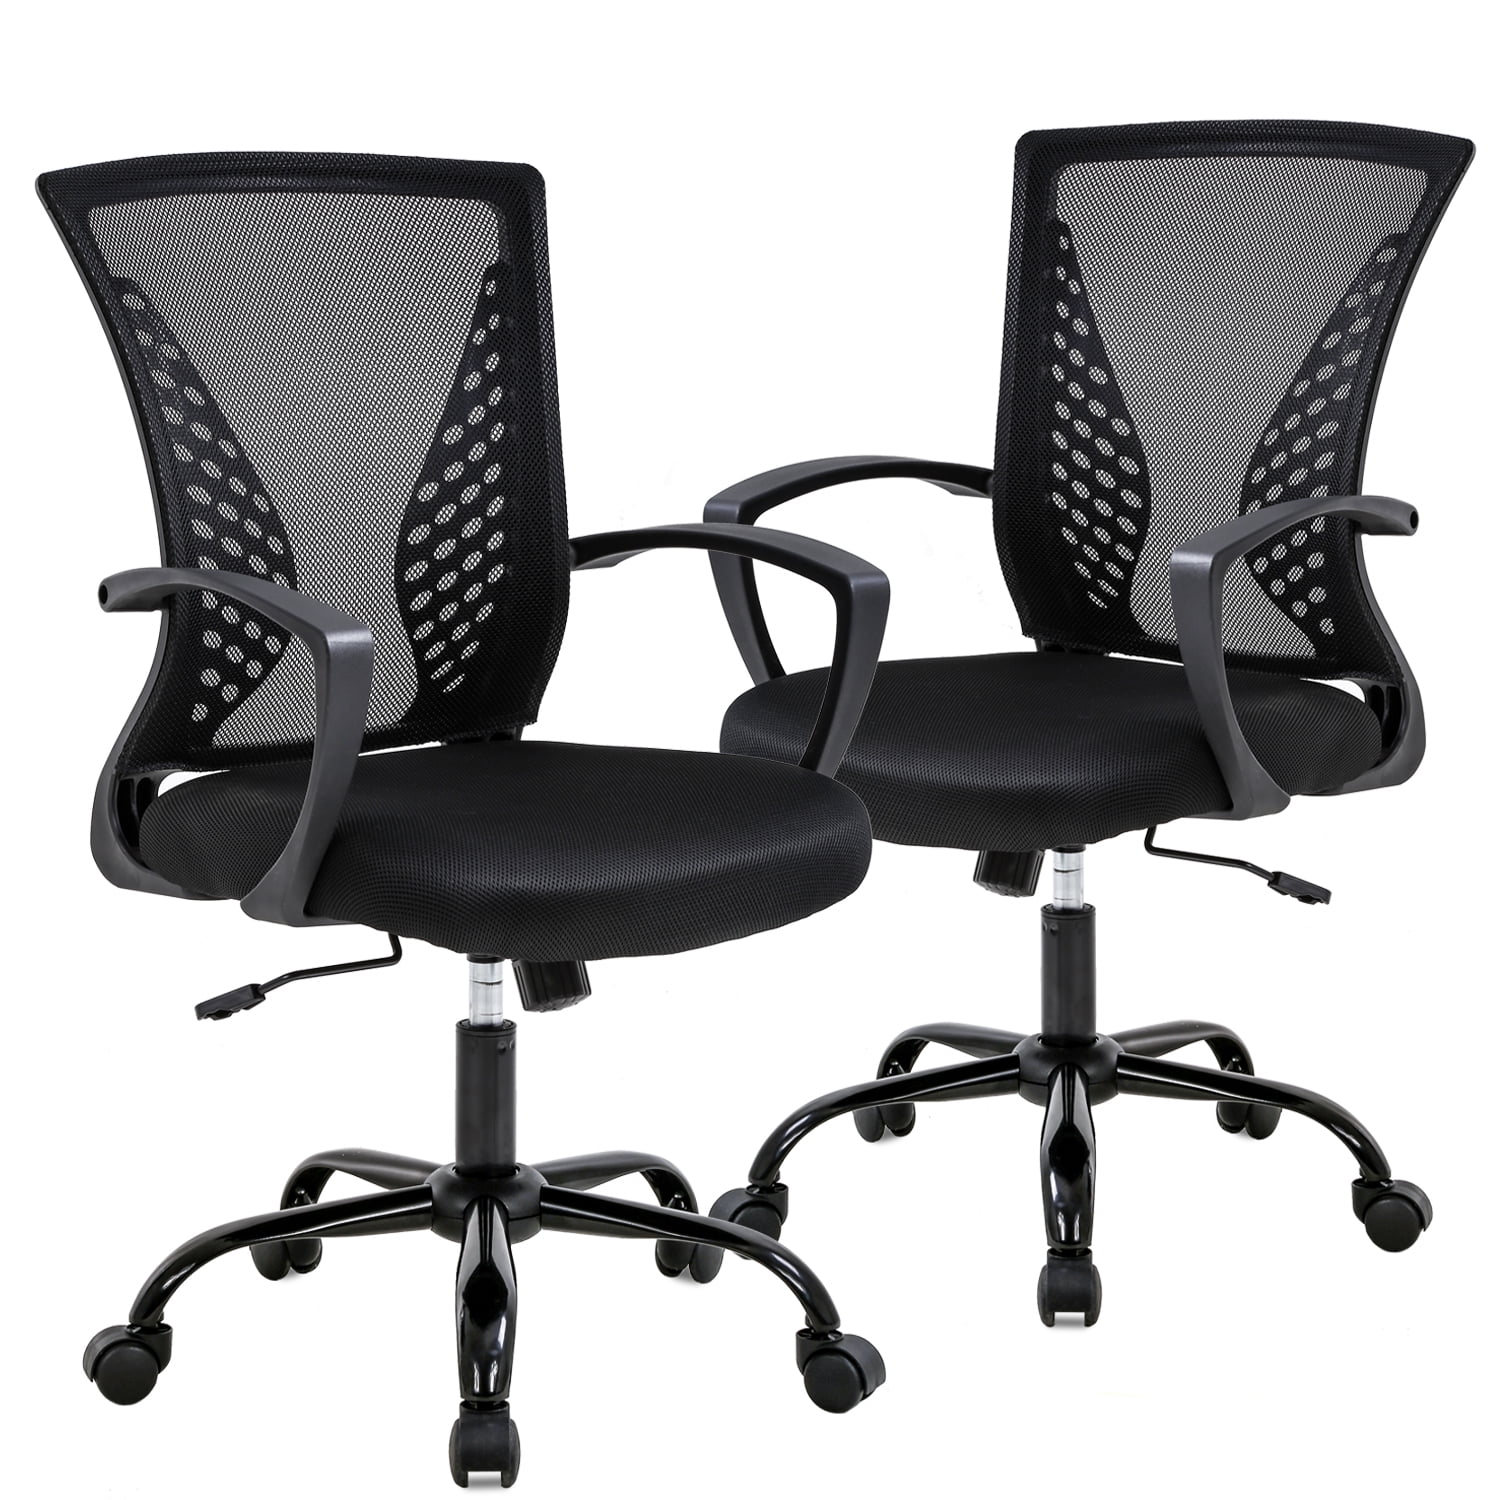 Details about   Ergonomic Swivel Mid Back Office Home Computer Desk Chair Mesh Lumbar Support 